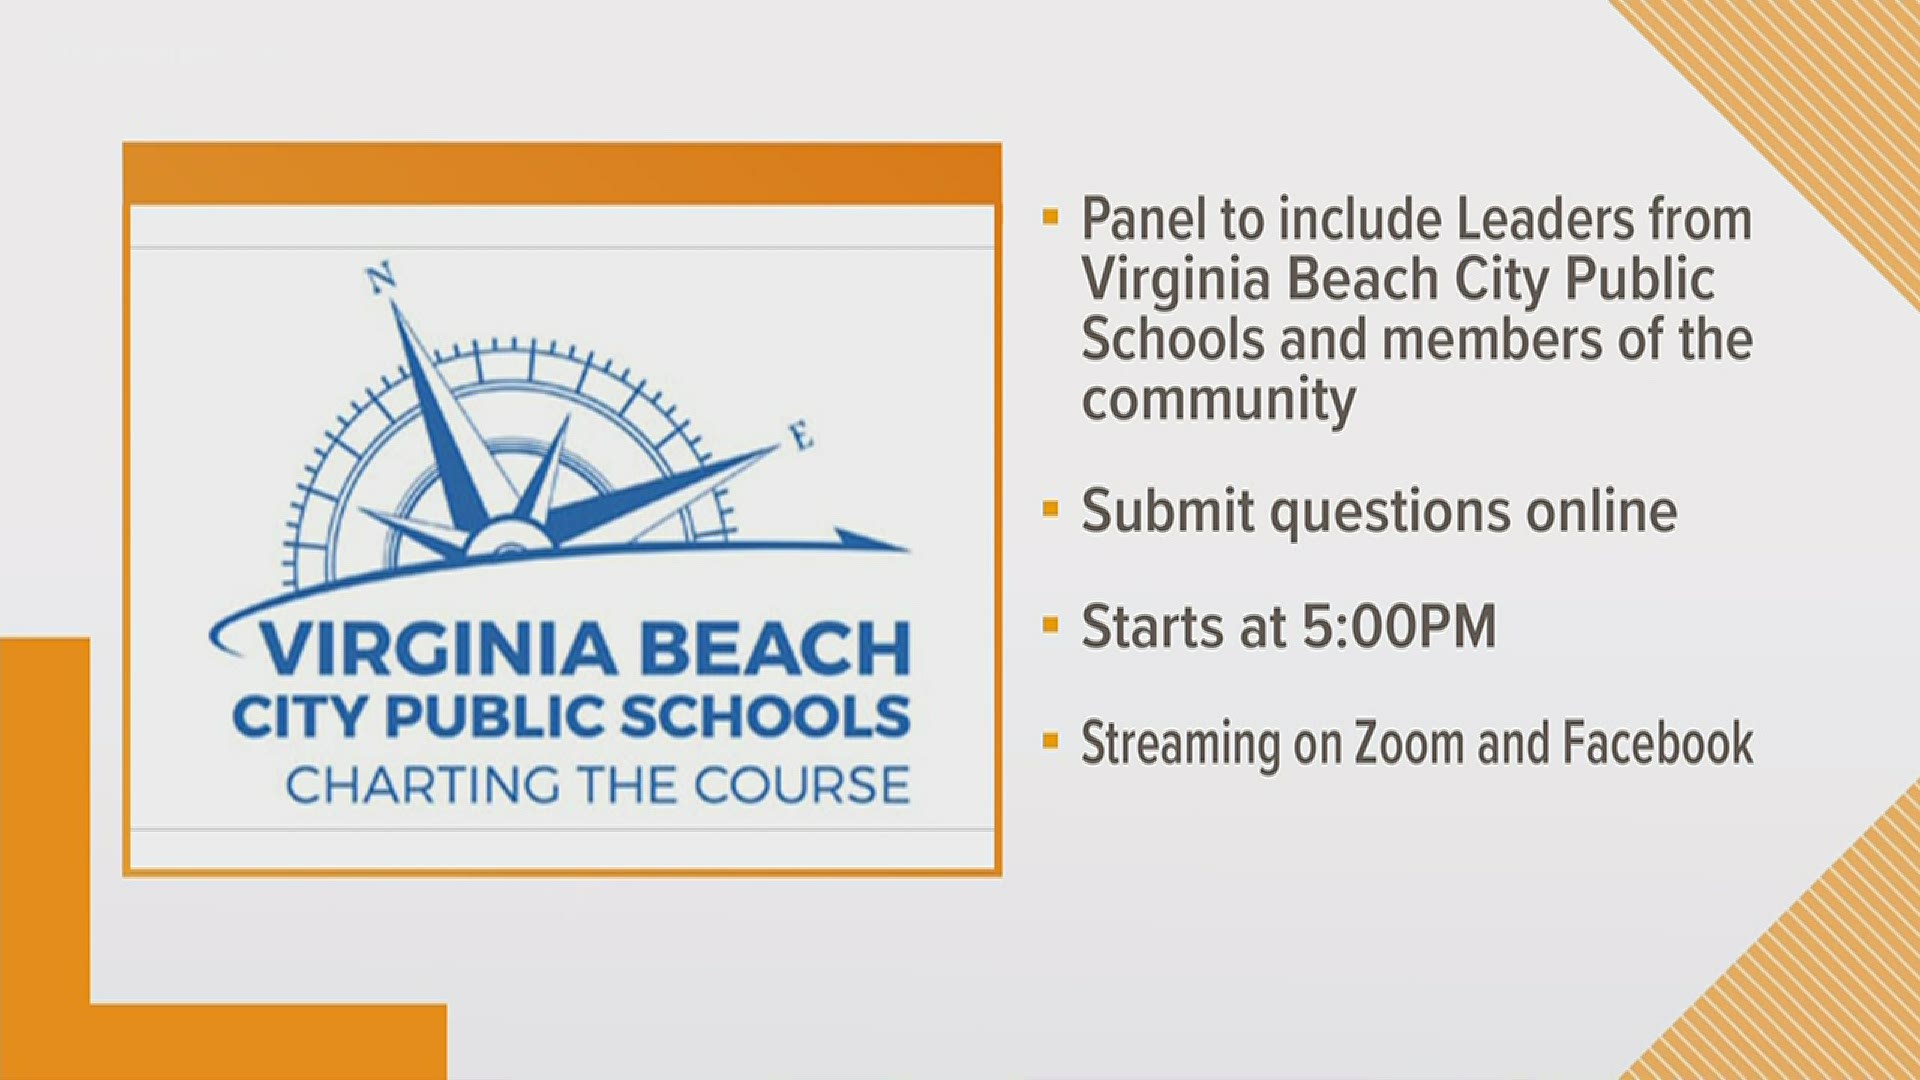 13News Now Madison Kimbro has more on the virtual discussion about race and equity that Virginia Beach City Public Schools is hosting.